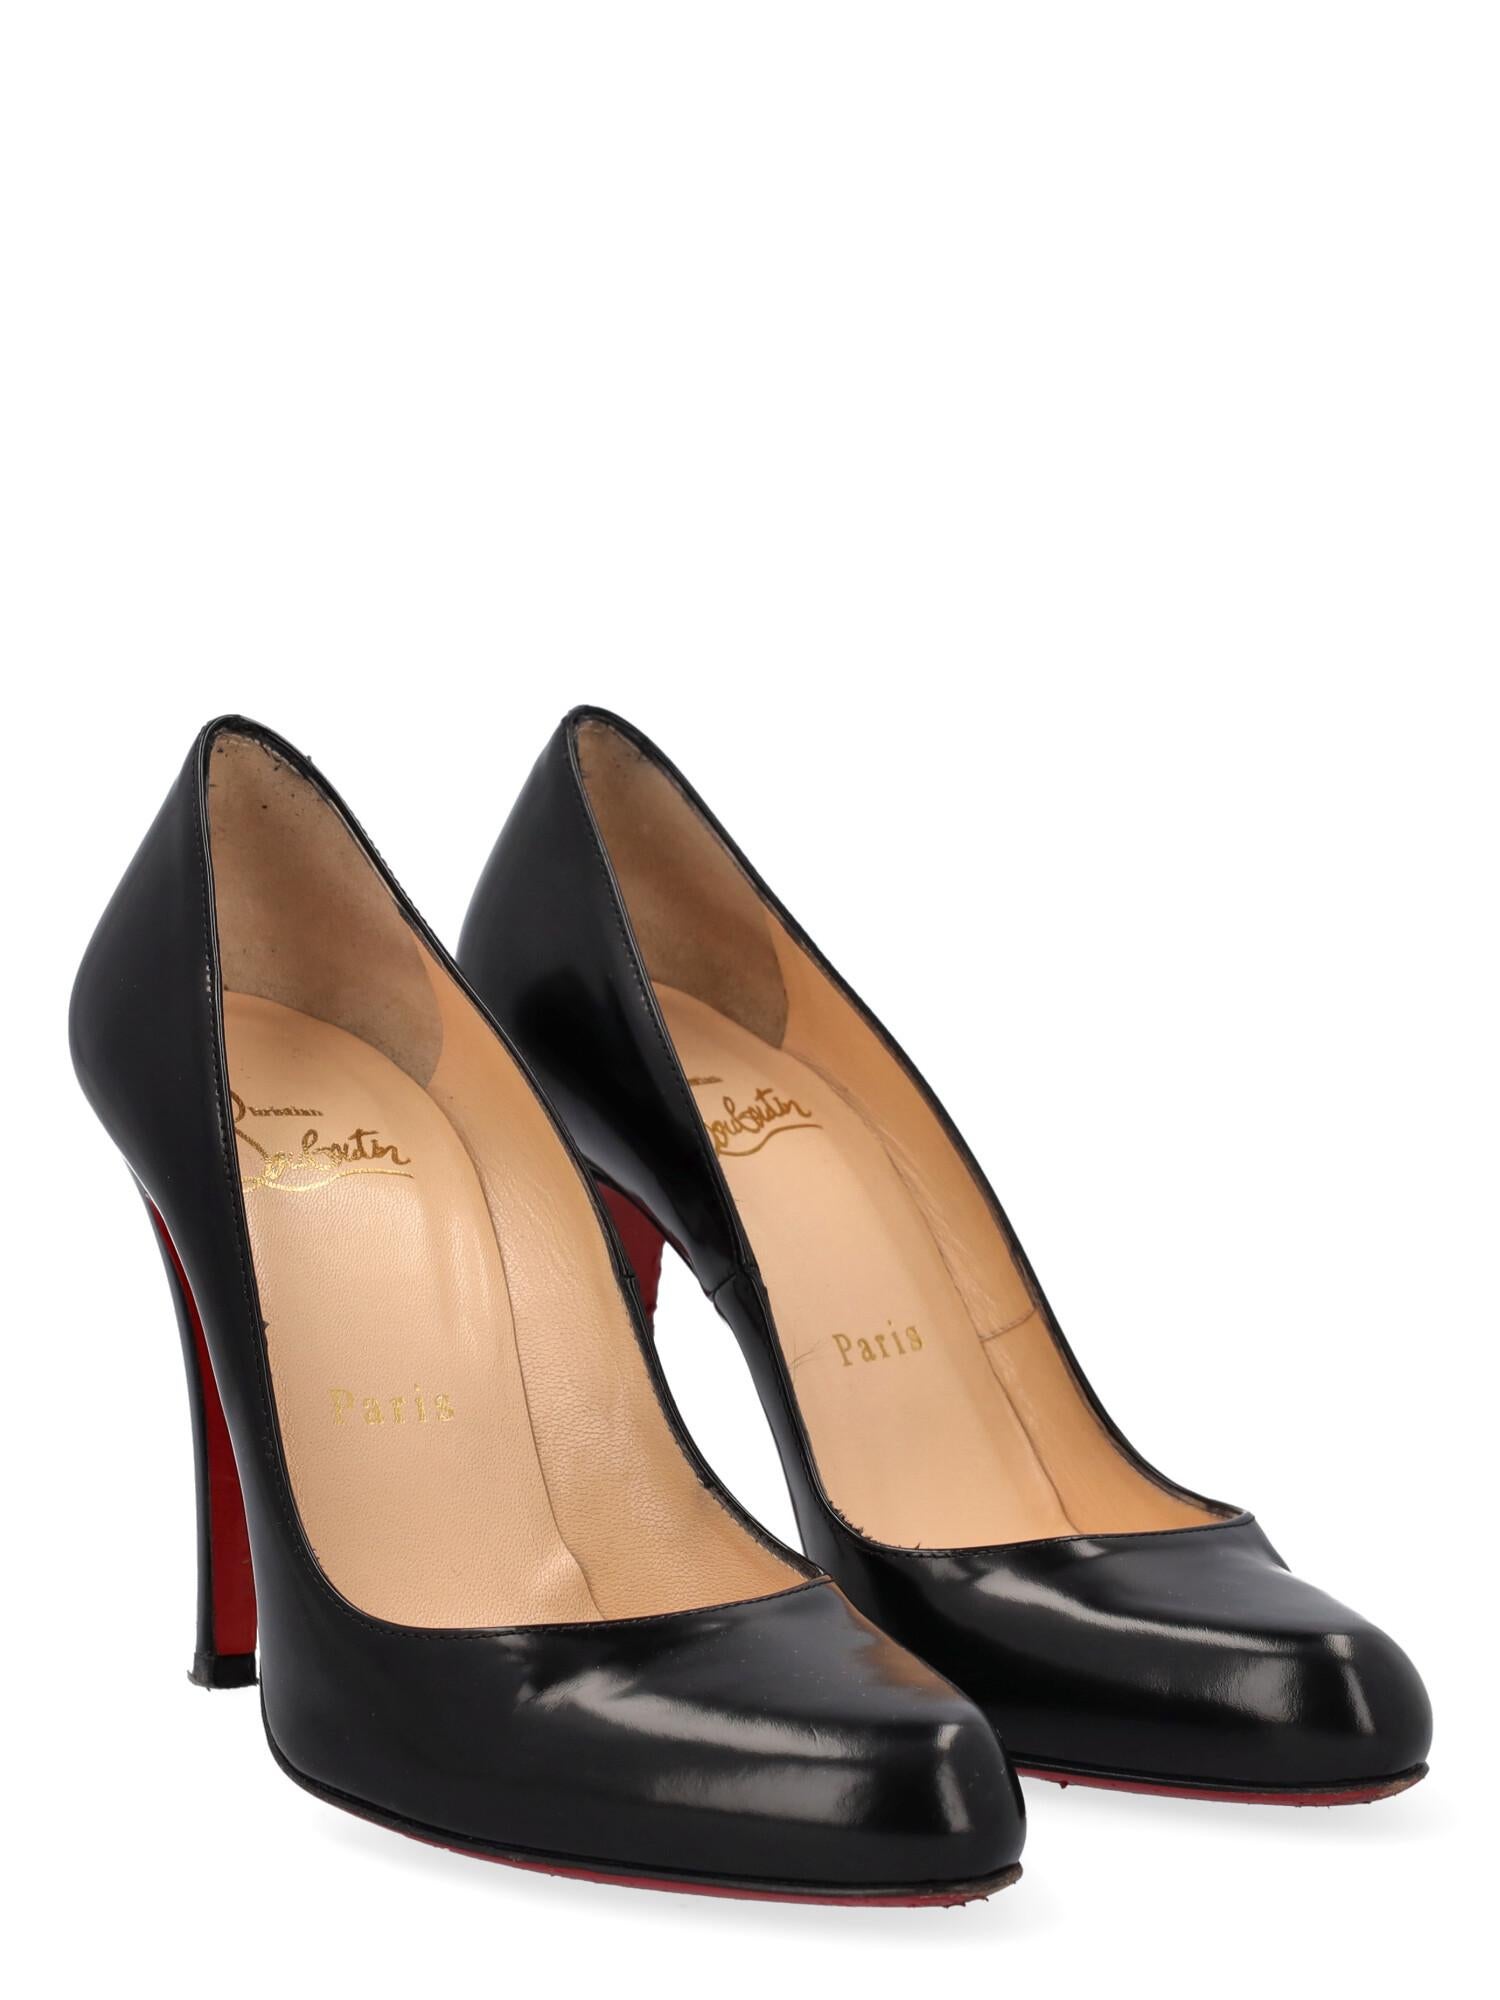 Pumps, leather, solid color, round toe, branded insole, leather insole, tapered heel, high heel

INCLUDES
 Dust bag

PRODUCT CONDITION: Very Good
Heel: slightly visible marks. Sole: visible signs of use. Upper: slightly visible deformation, slightly